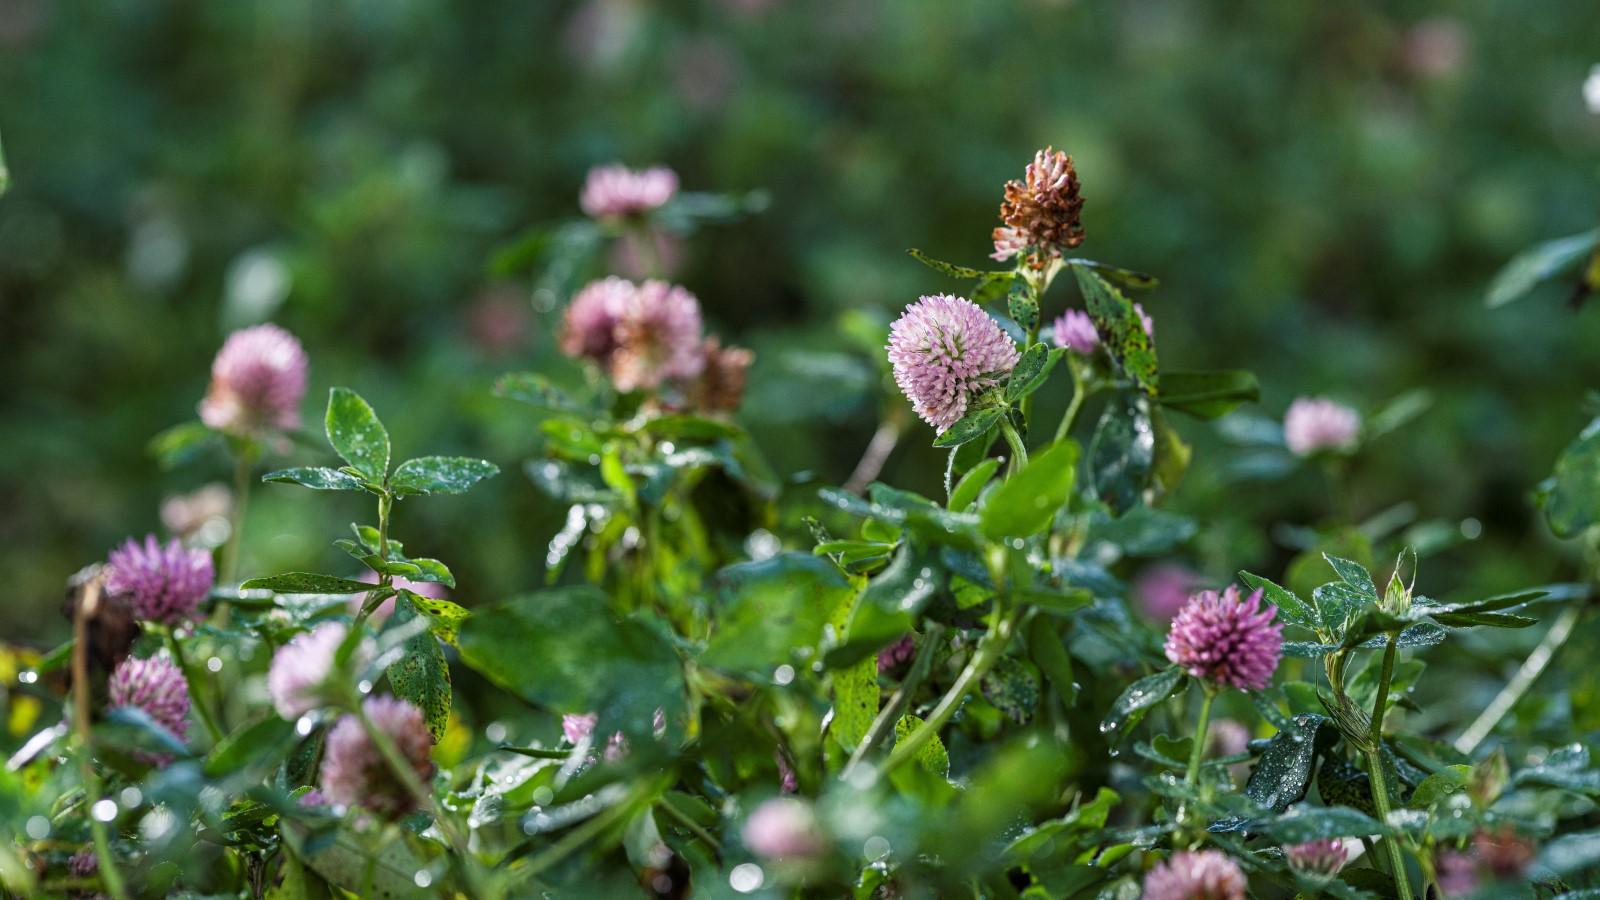 red clover in a mixed sward of grass